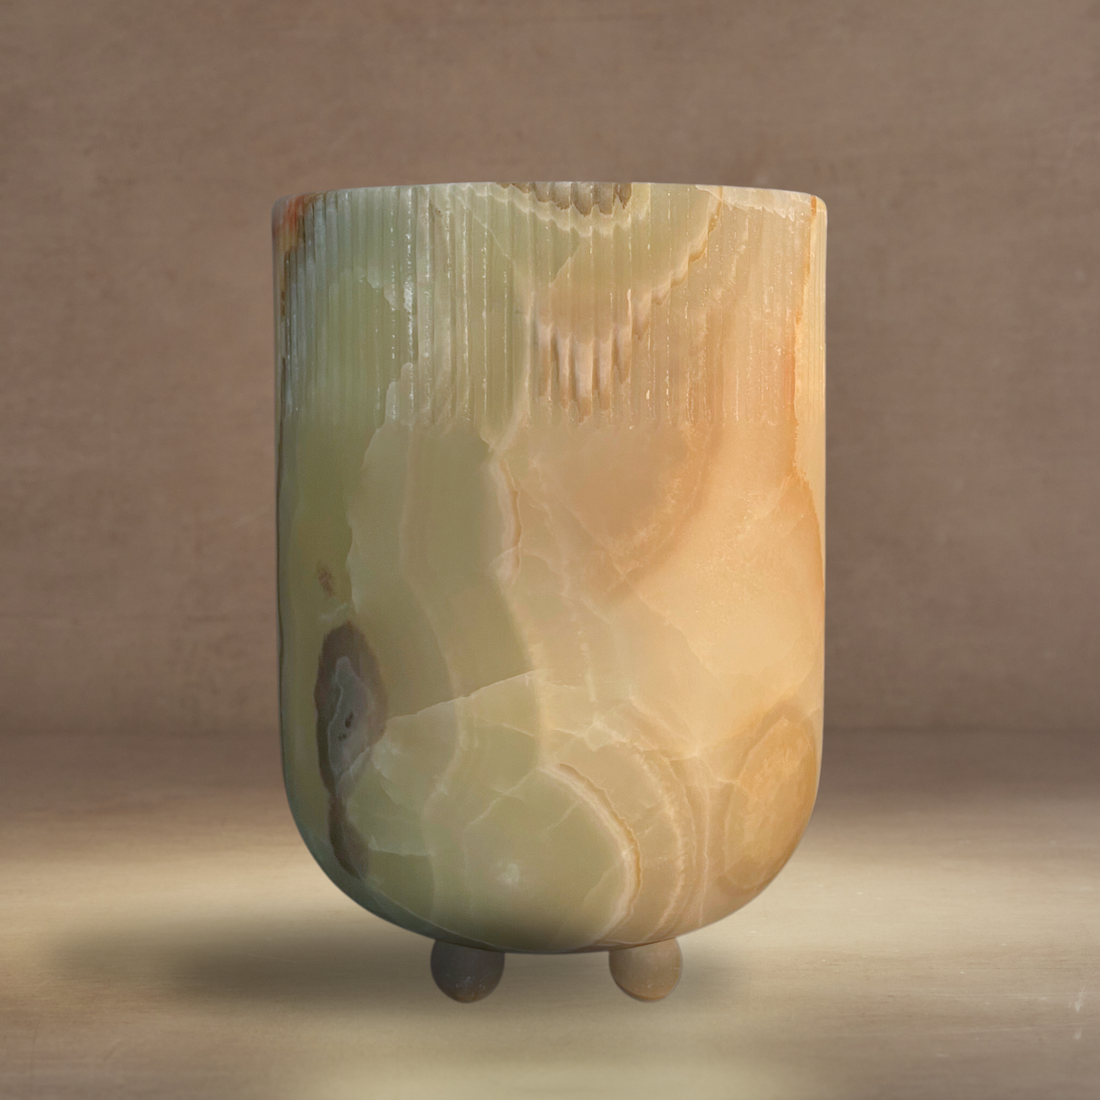 Studio H Collection Ceres Stone Vessel - Green Onyx